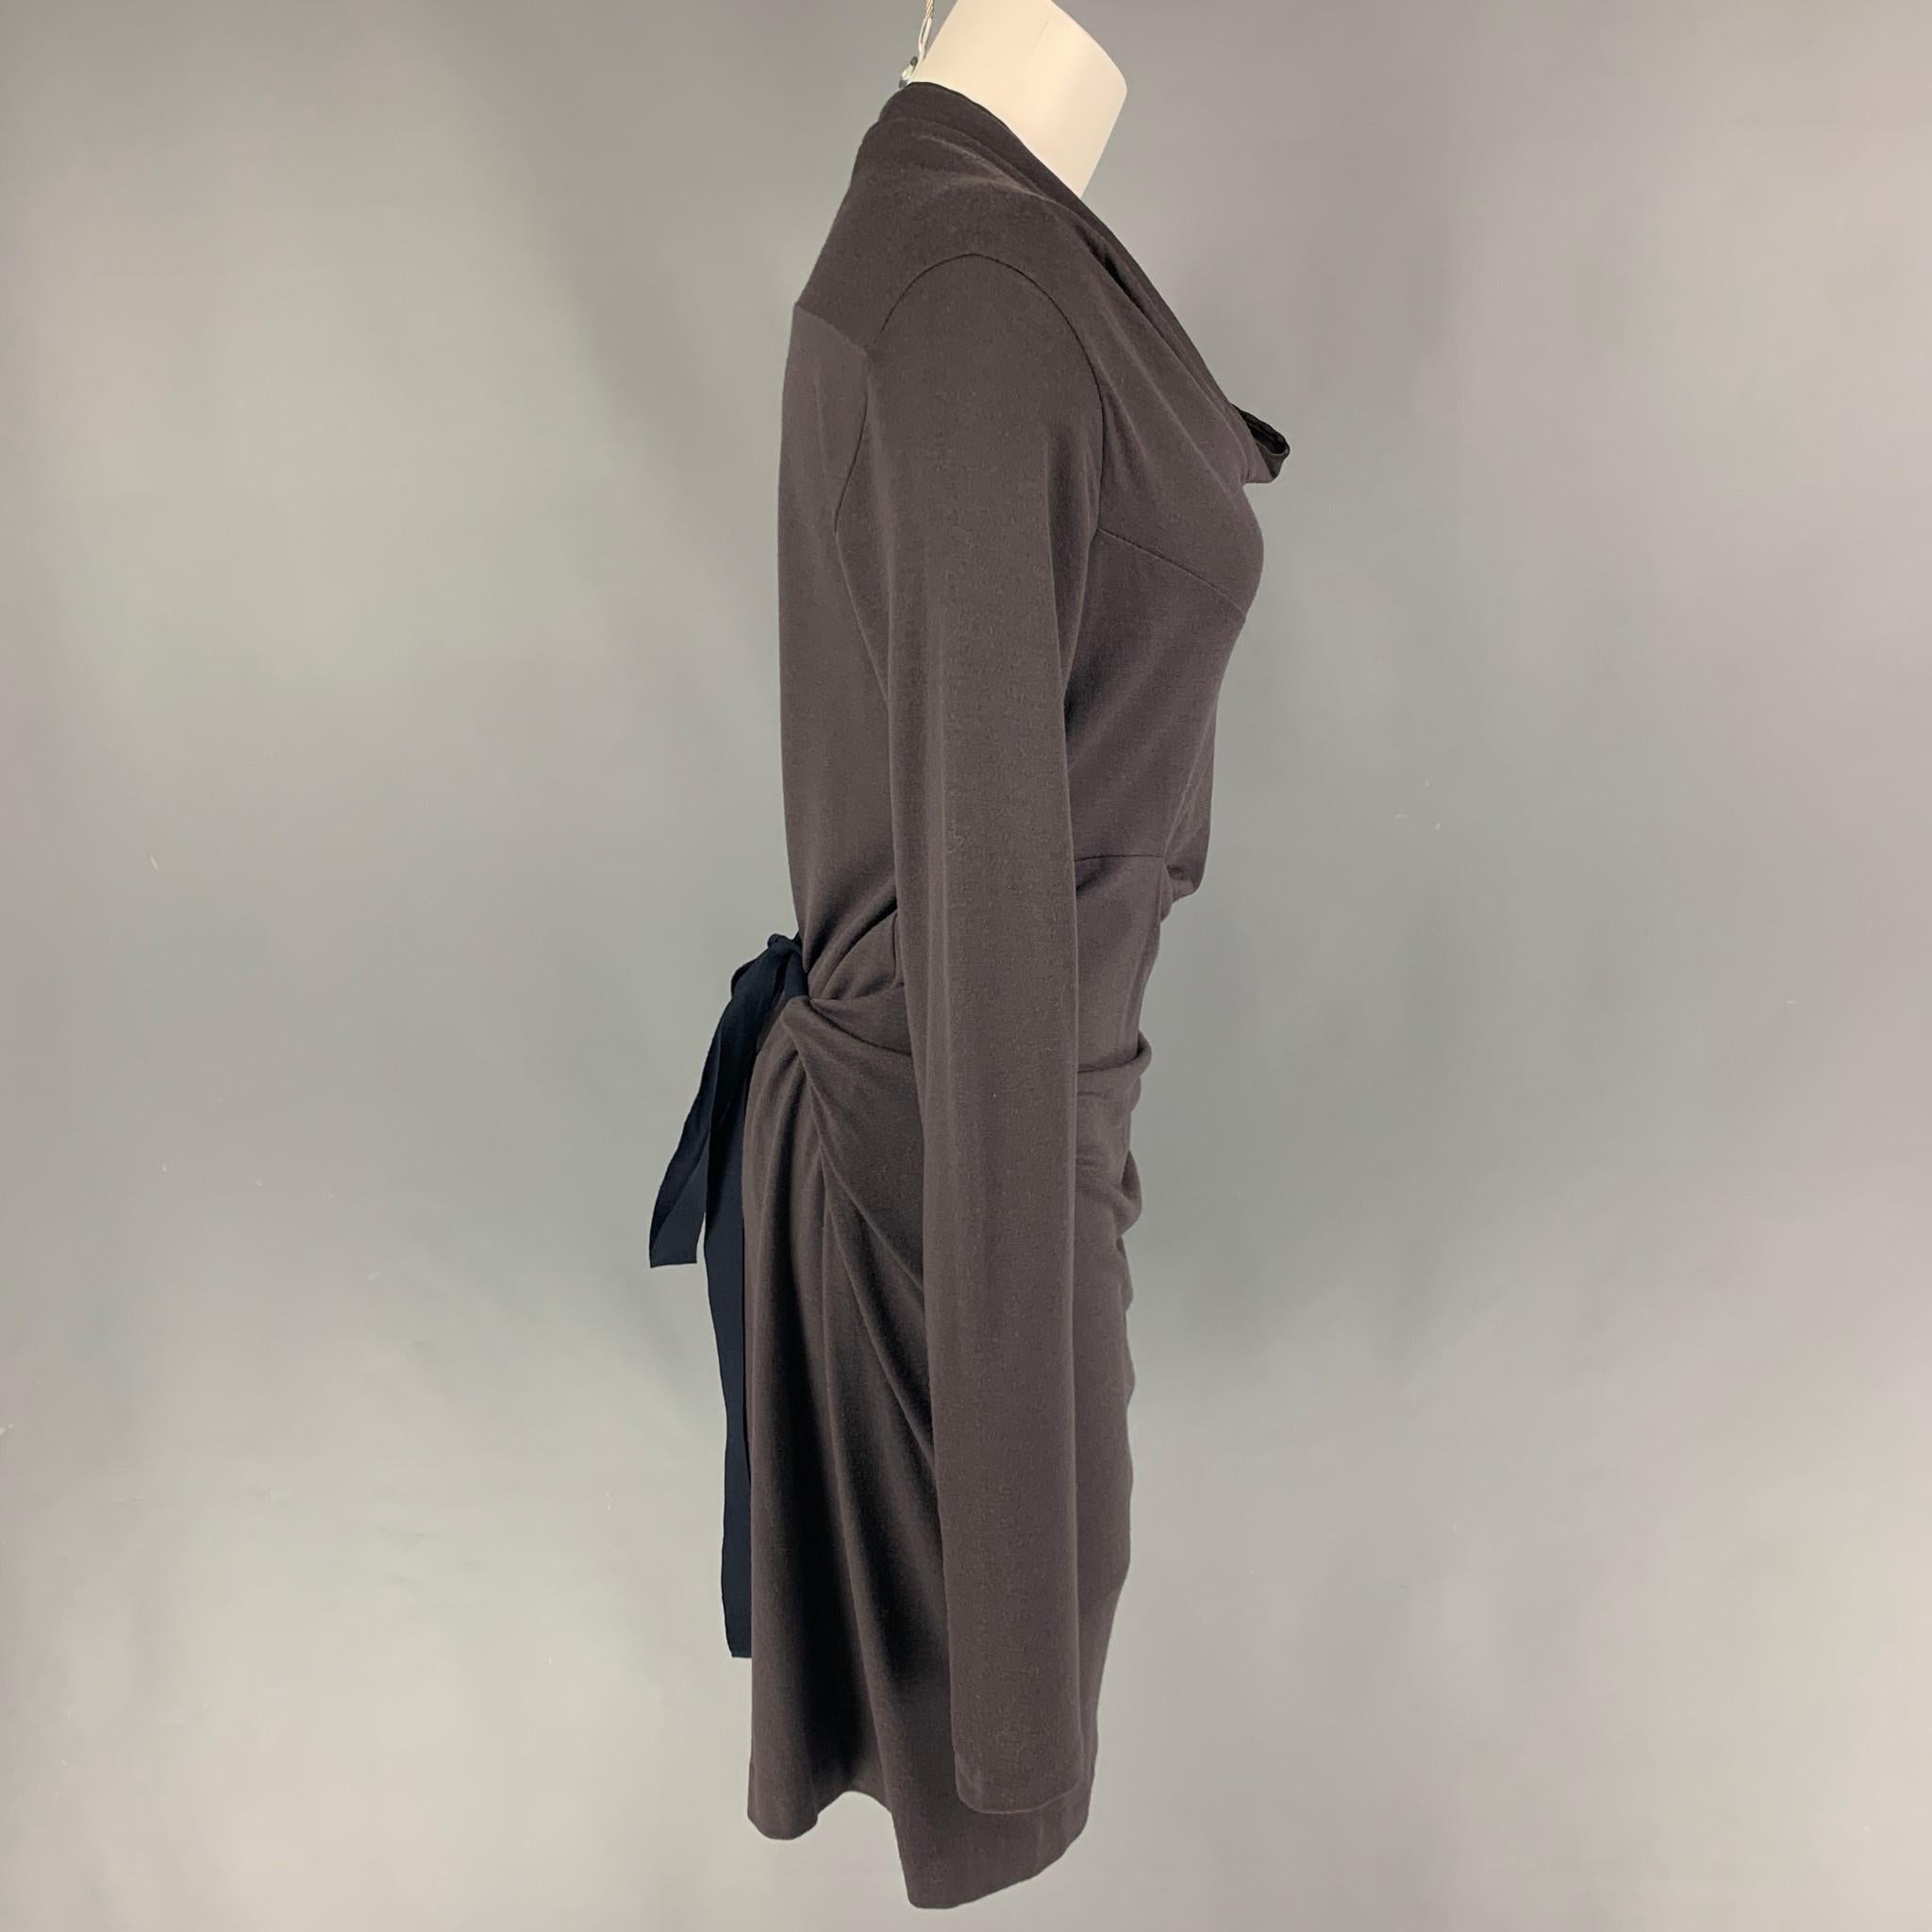 BRUNELLO CUCINELLI dress comes in a taupe jersey material featuring long sleeves, draped neckline, and a belted detail. 

Very Good Pre-Owned Condition.
Marked: 42

Measurements:

Shoulder: 15 in.
Bust: 36 in
Waist: 36 in.
Sleeve: 31.5 in.
Length: